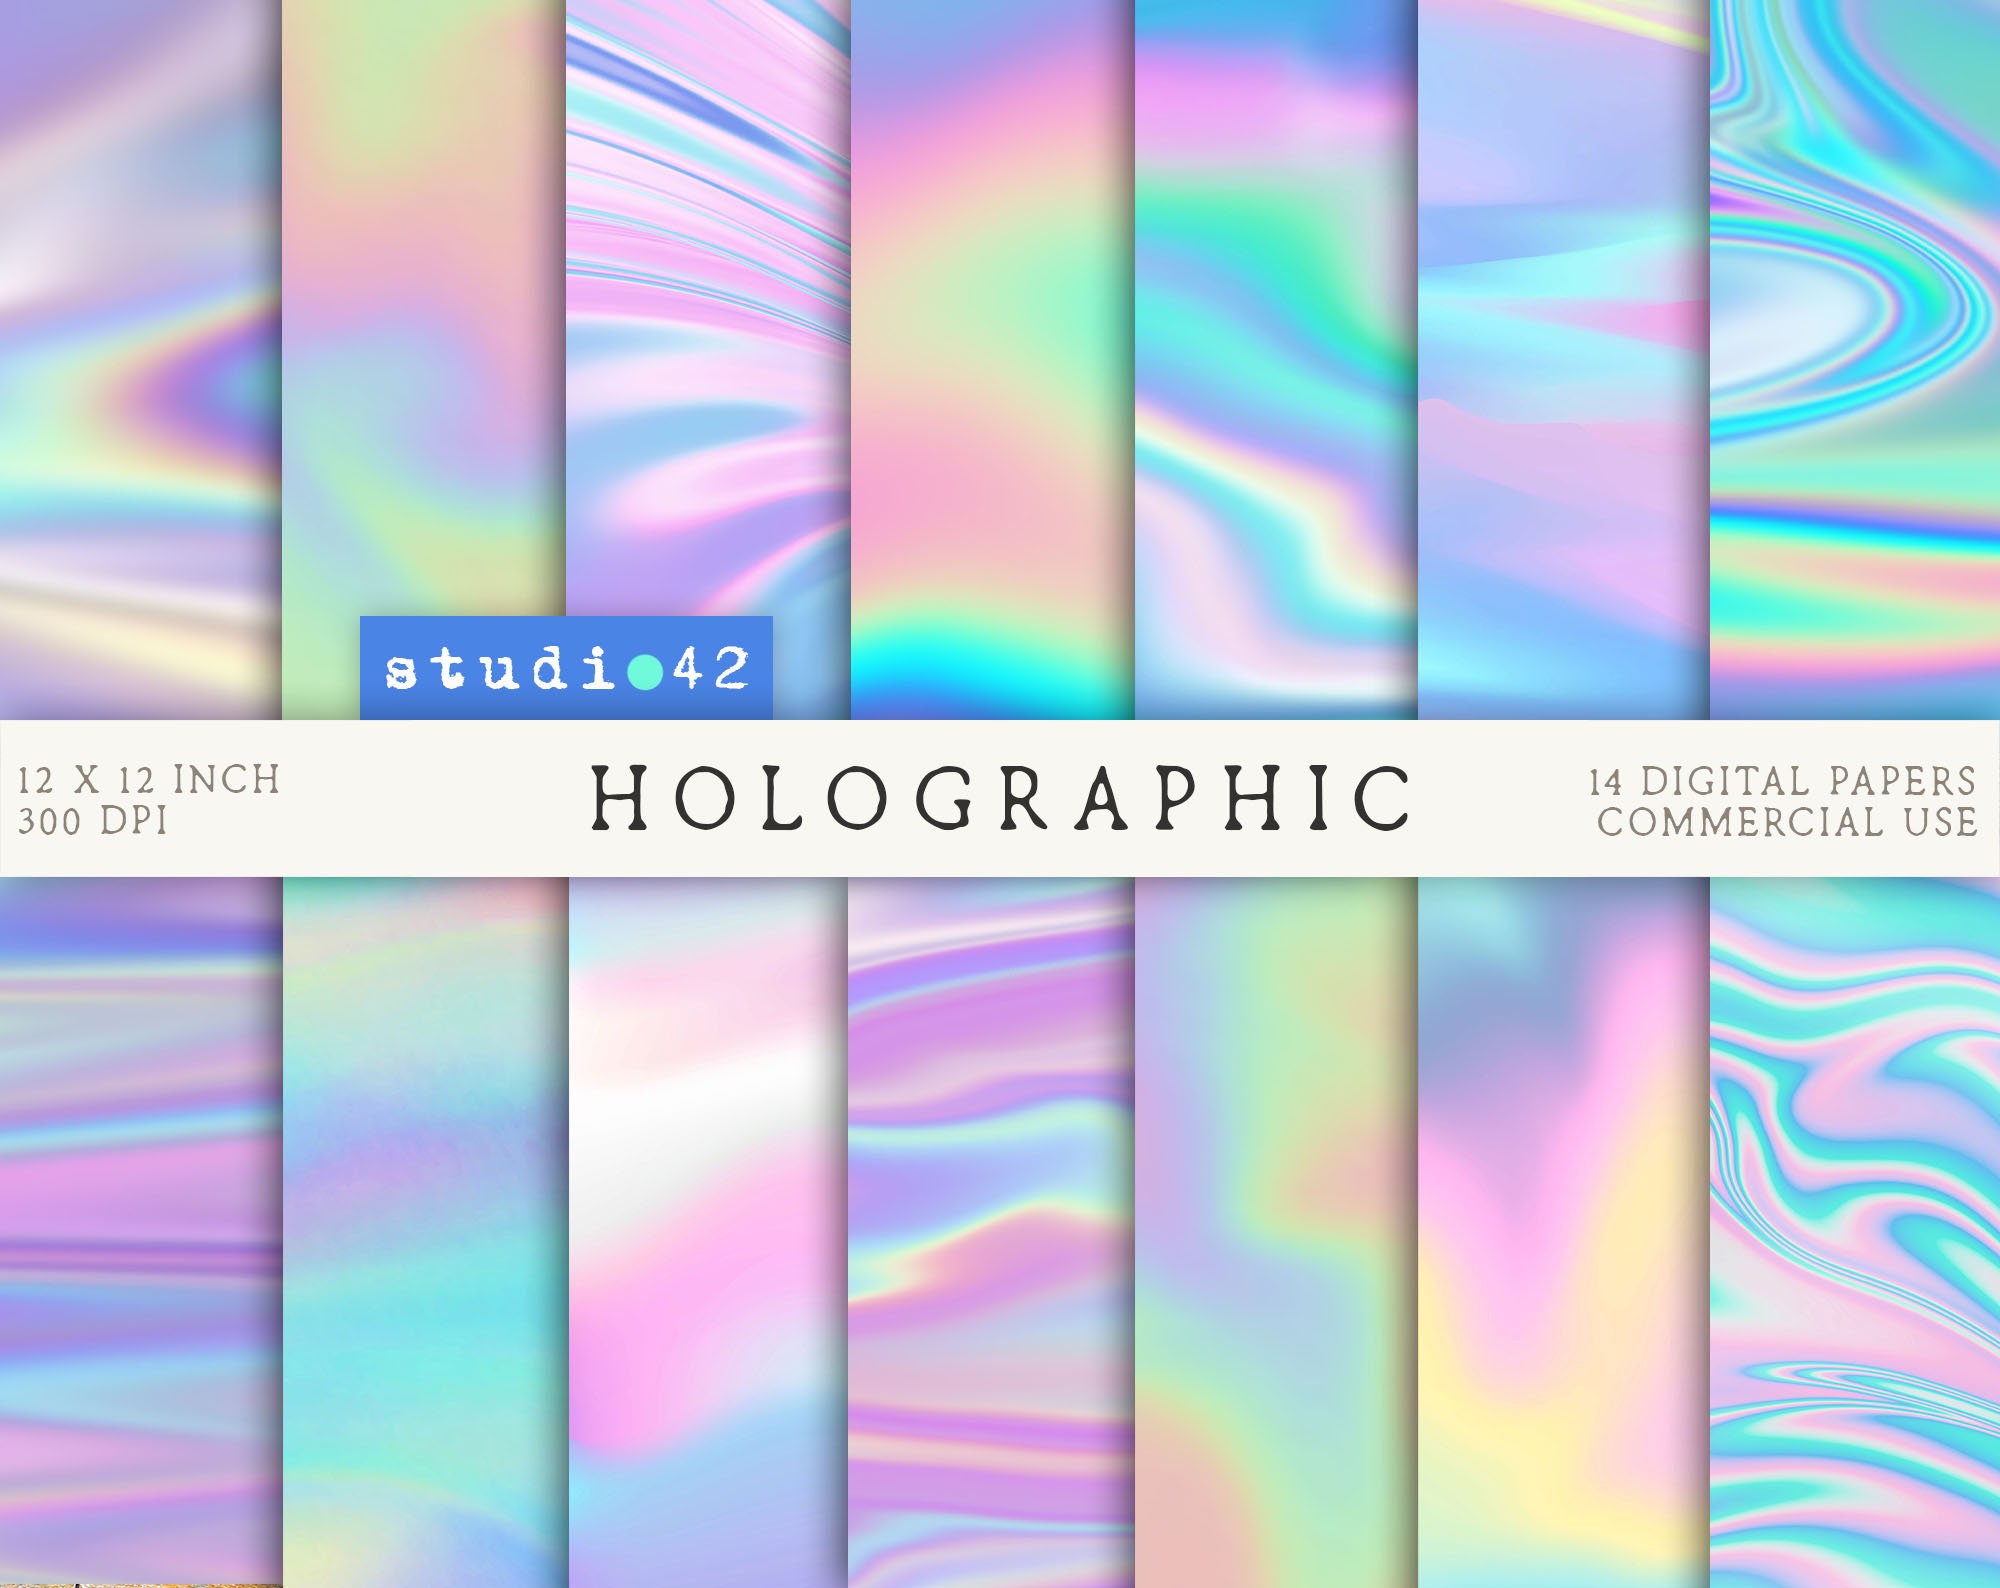 Holographic Heat Transfer Sheets